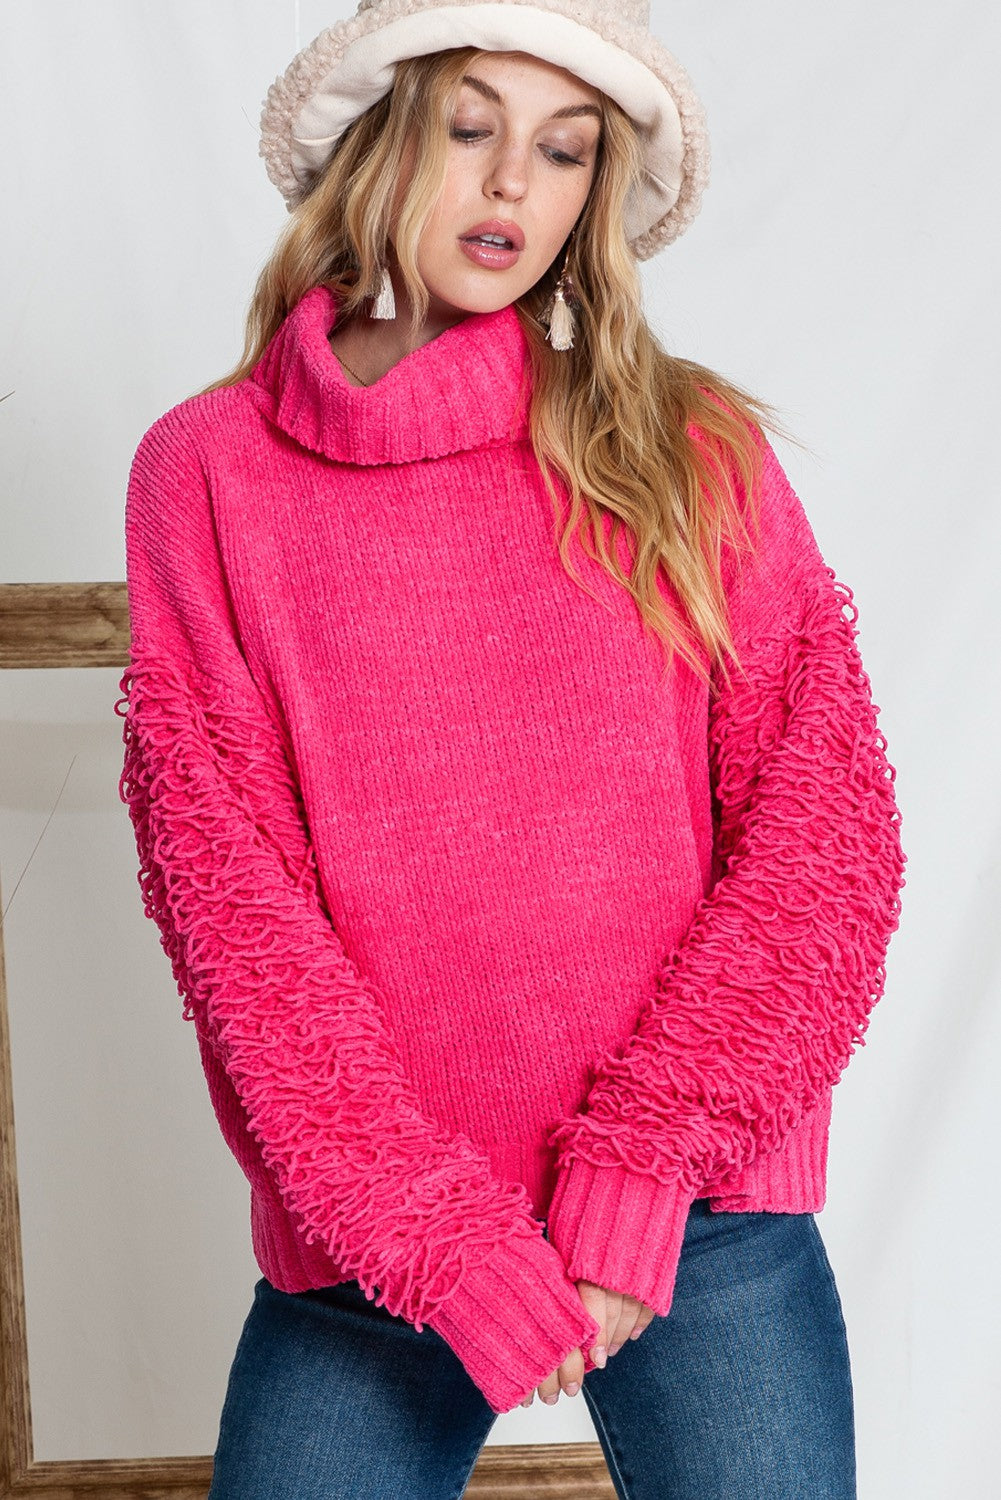 Sweater, Turtleneck, Fuzzy Sleeve, Pink, Regular and Plus if